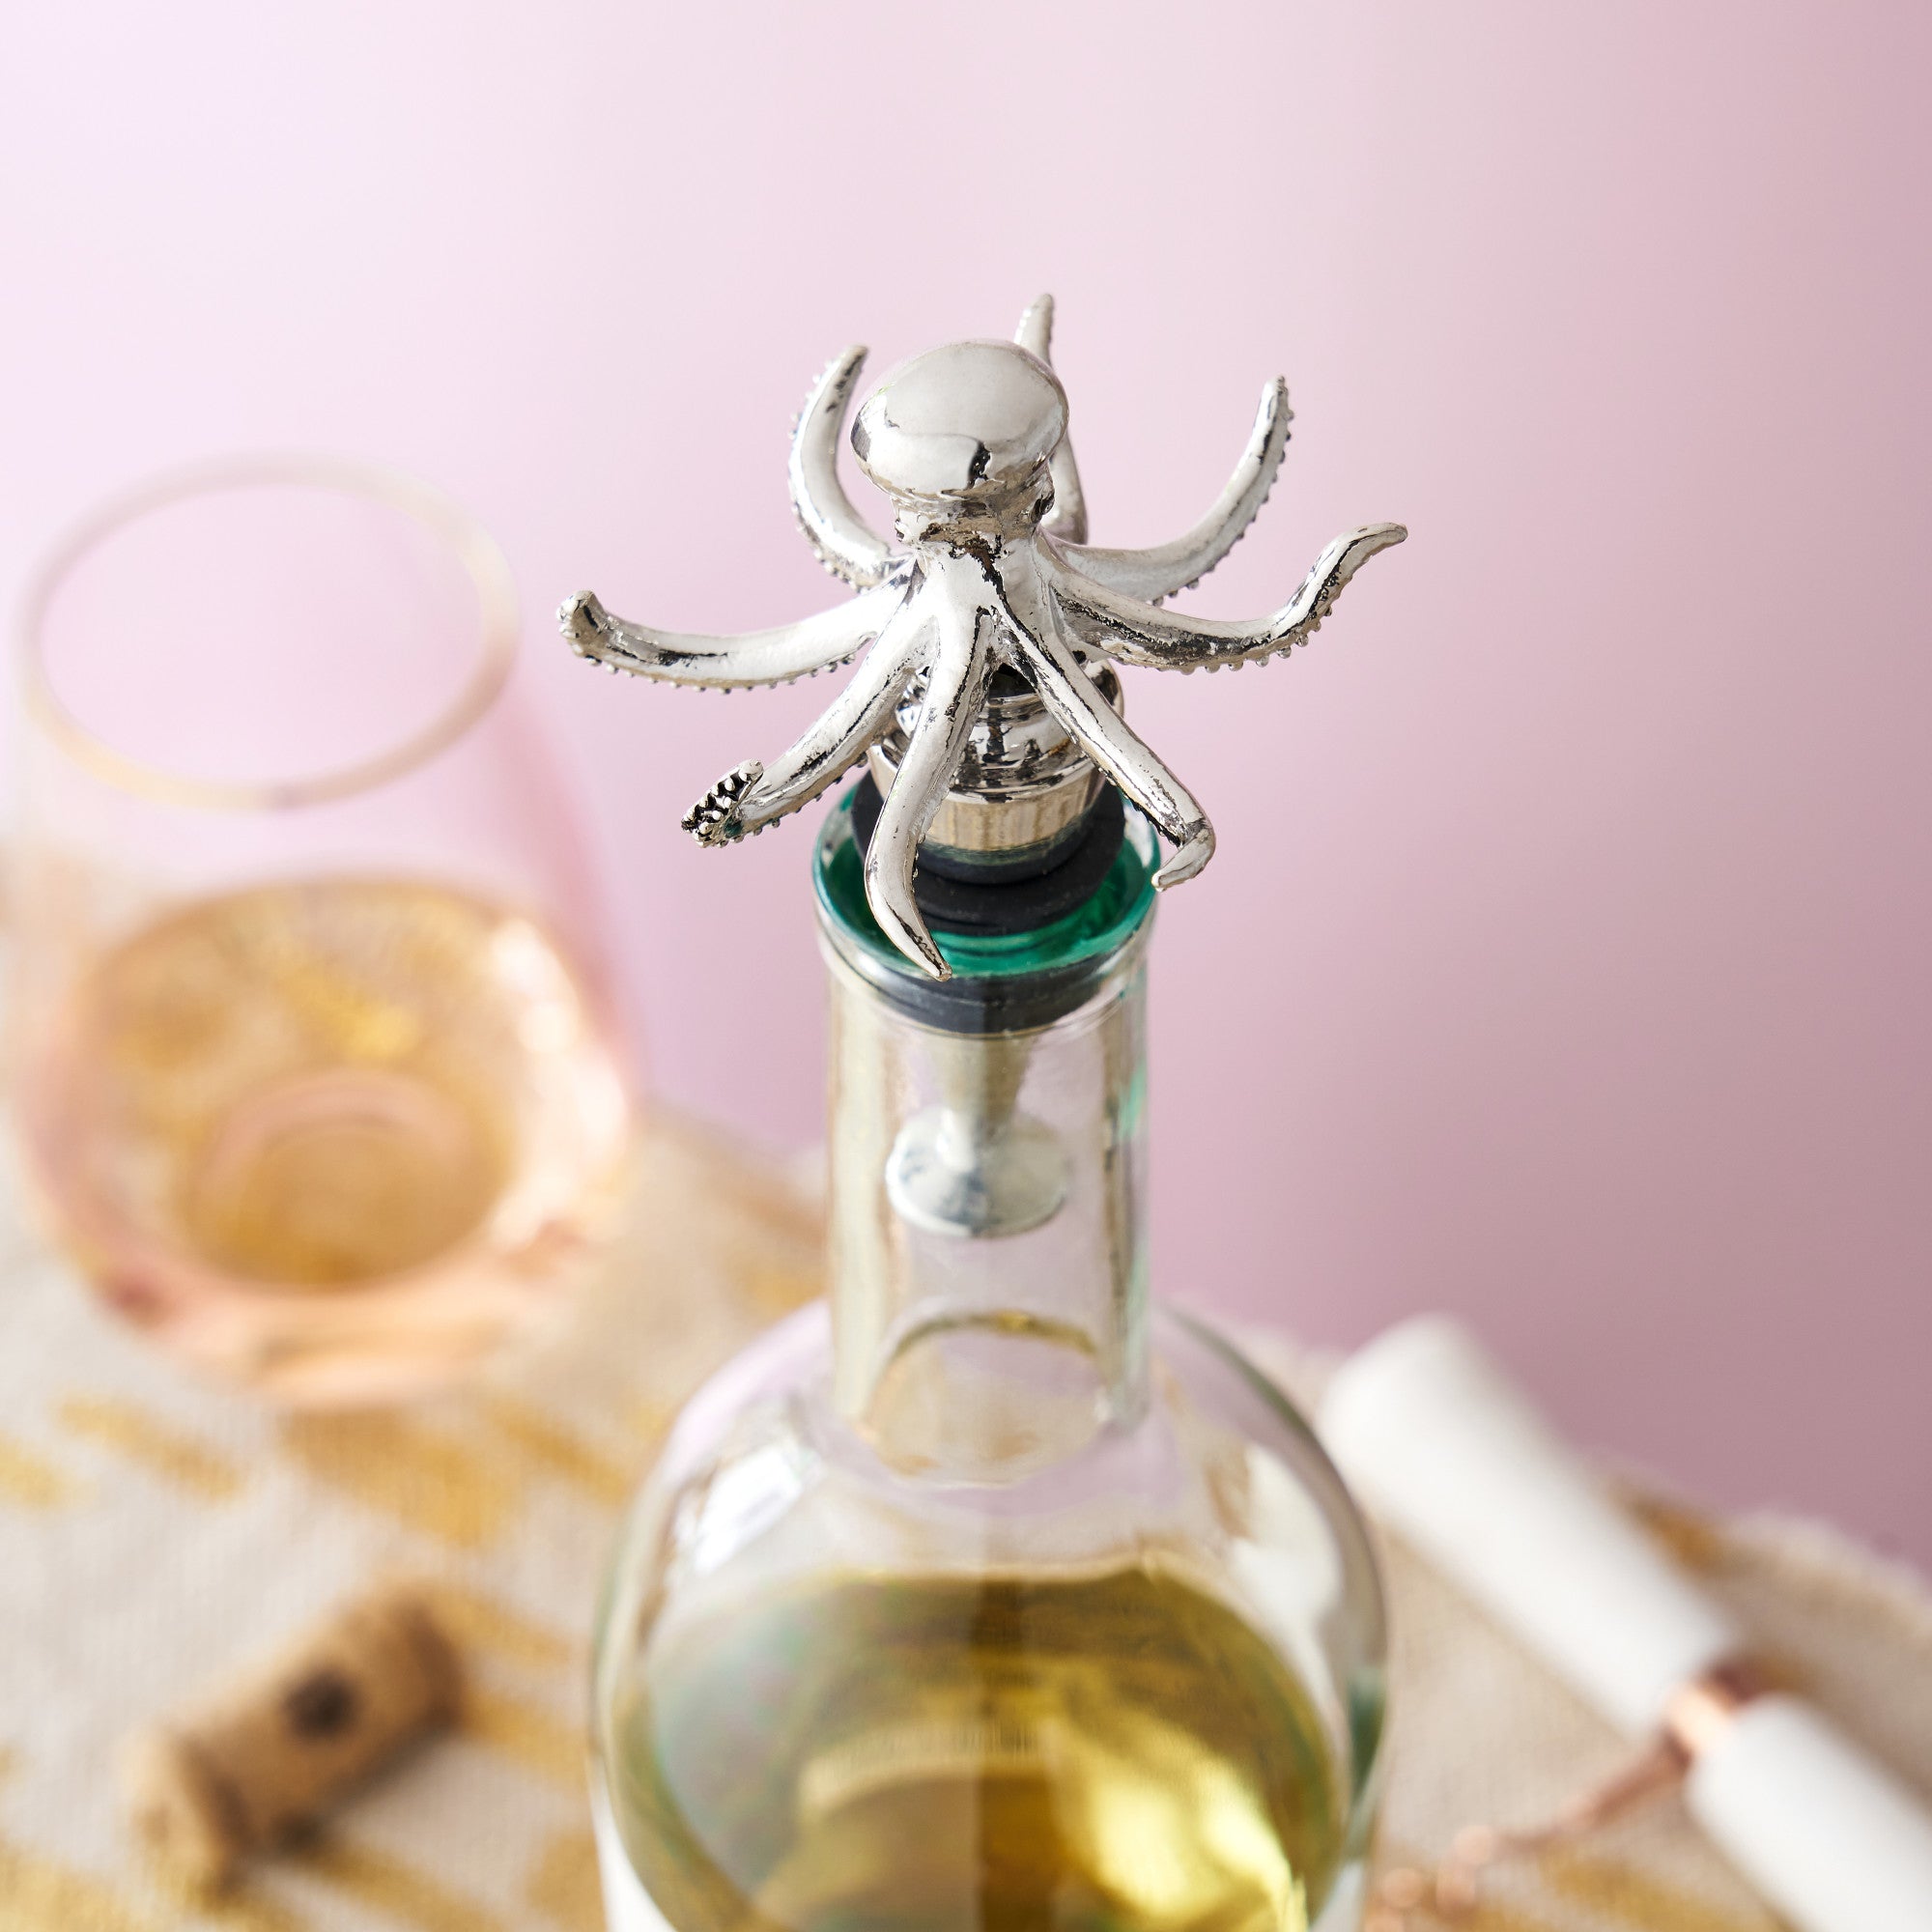 Octopus Bottle Stopper by Twine Living® (3496) Wine Accessories Twine